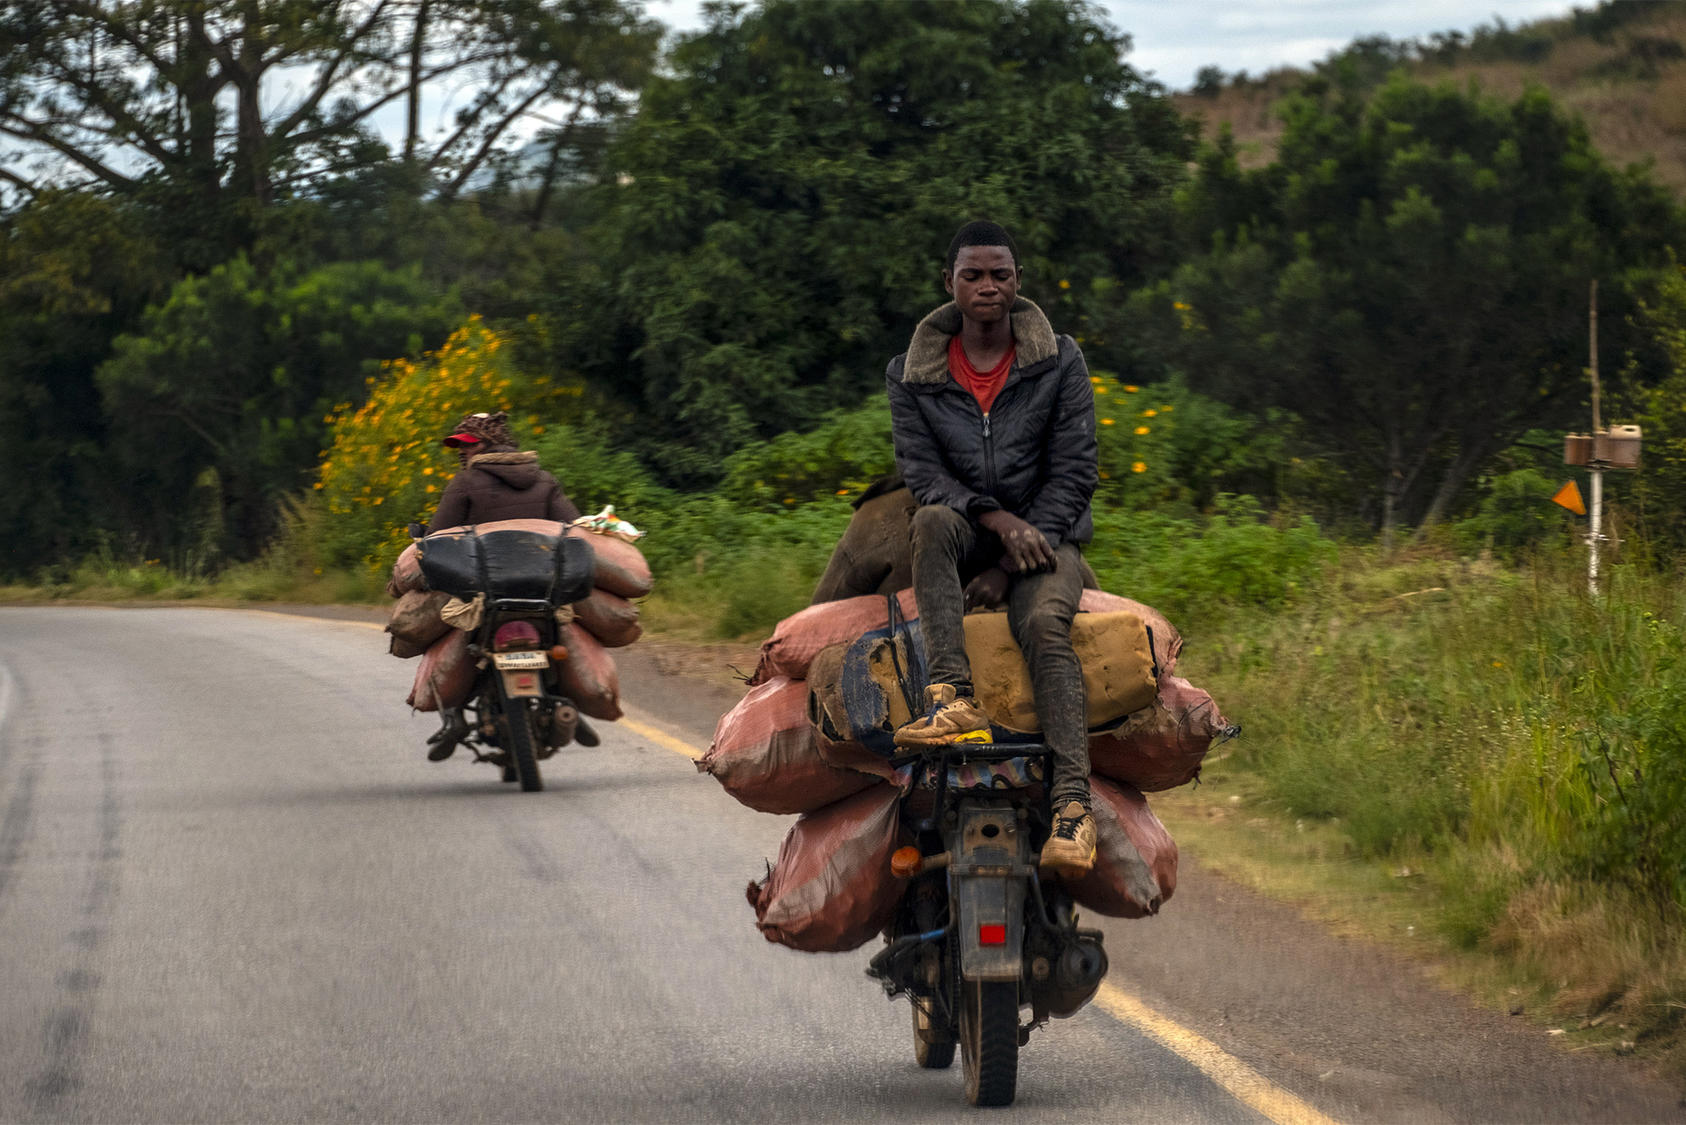 Motorcycles haul cobalt ore, vital to “green” industries such as electric vehicles, from a mine in the Democratic Republic of Congo. Development of Africa’s economy can dilute the influence of authoritarian powers. (Ashley Gilbertson/The New York Times)